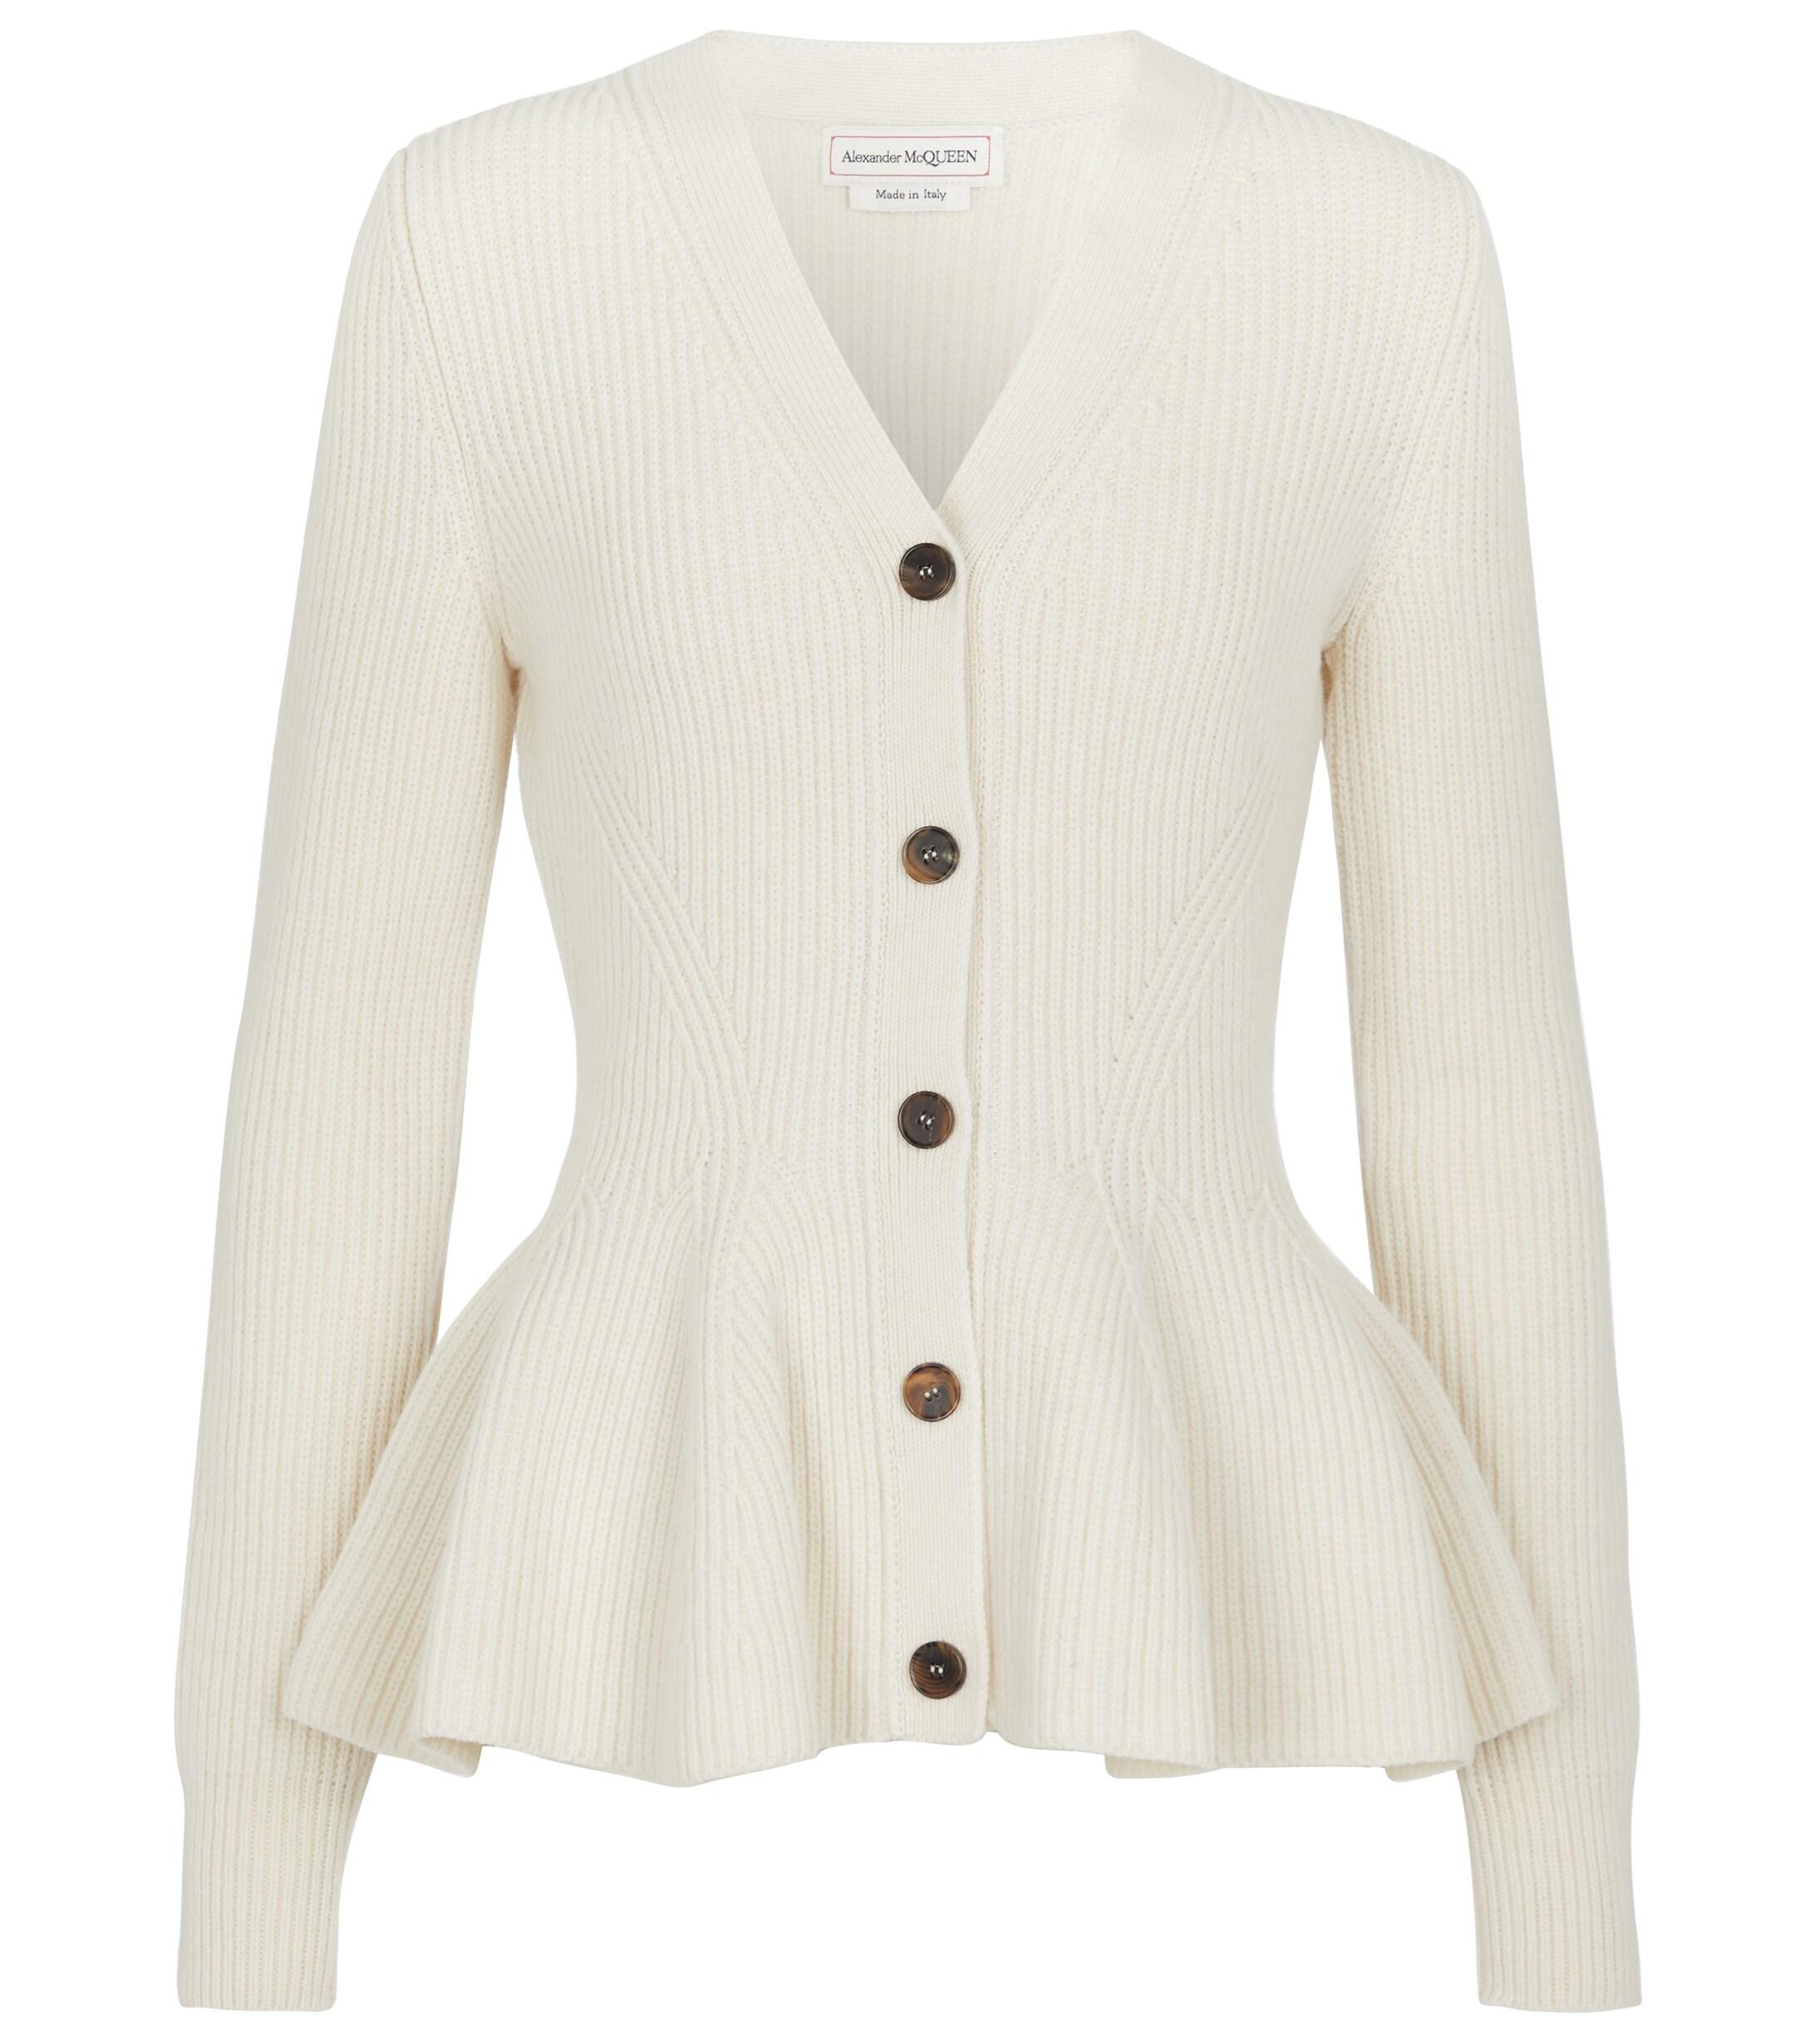 Alexander McQueen Wool And Cashmere Cardigan in White